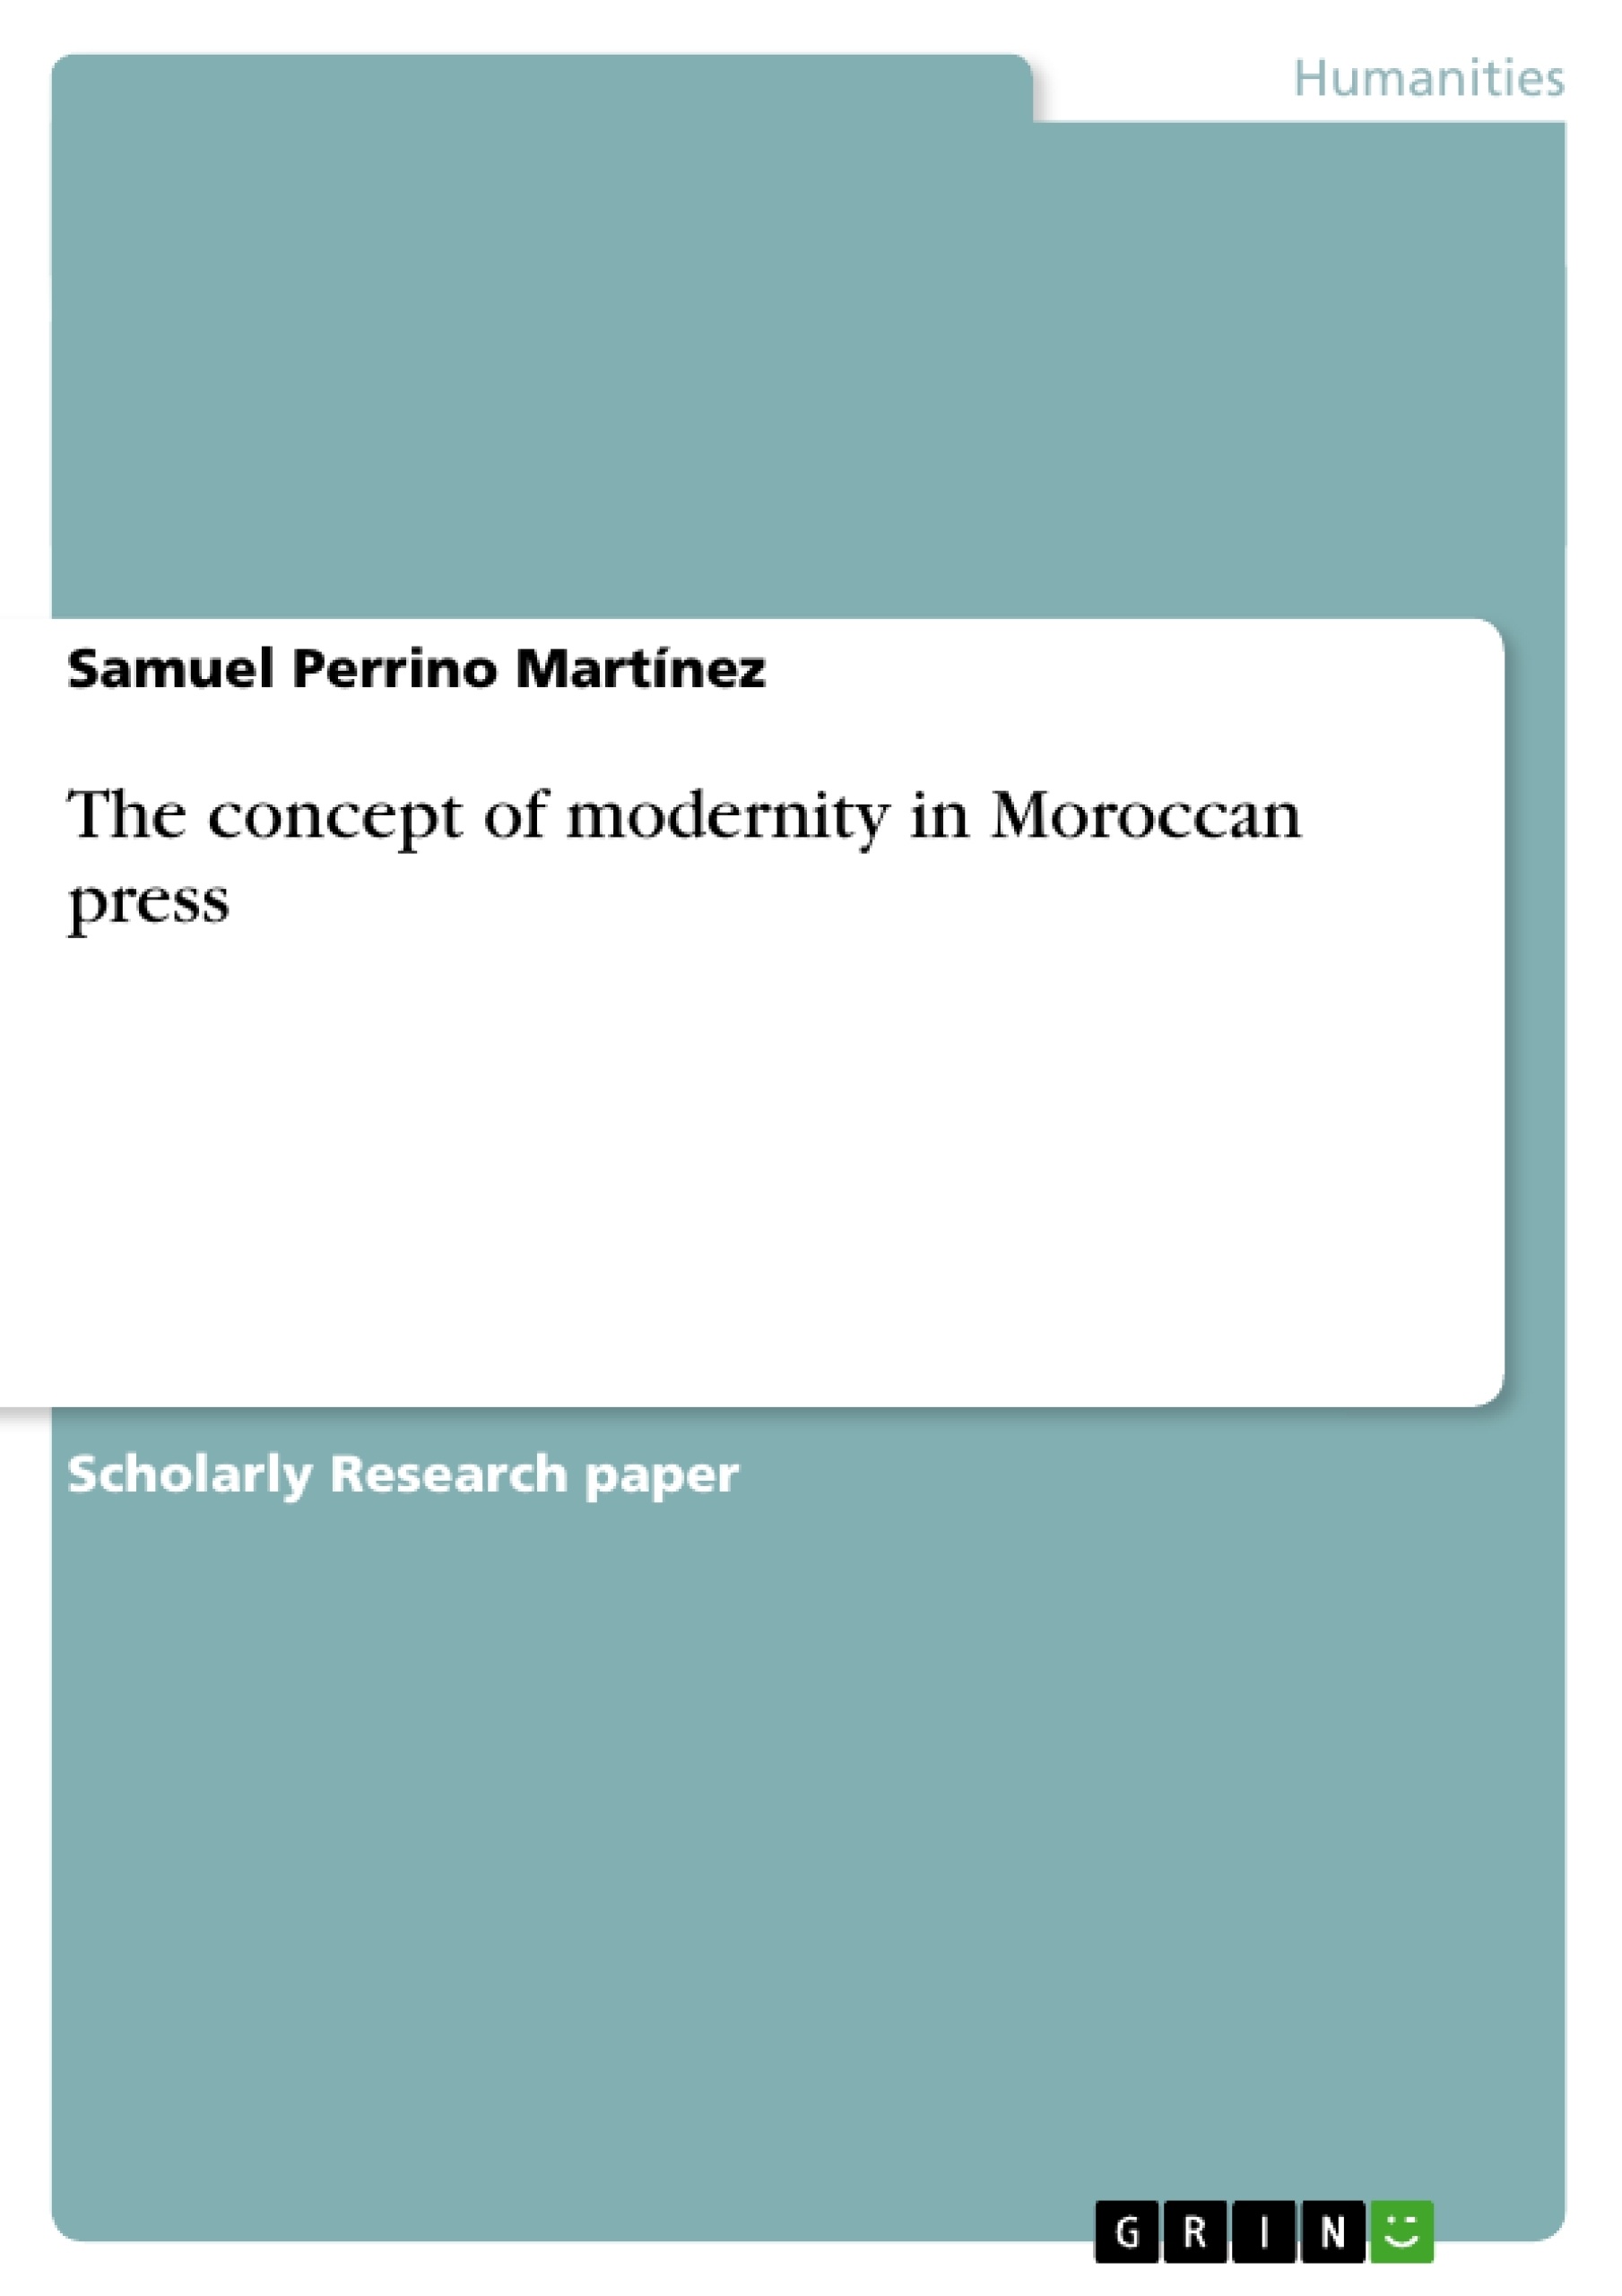 Title: The concept of modernity in Moroccan press